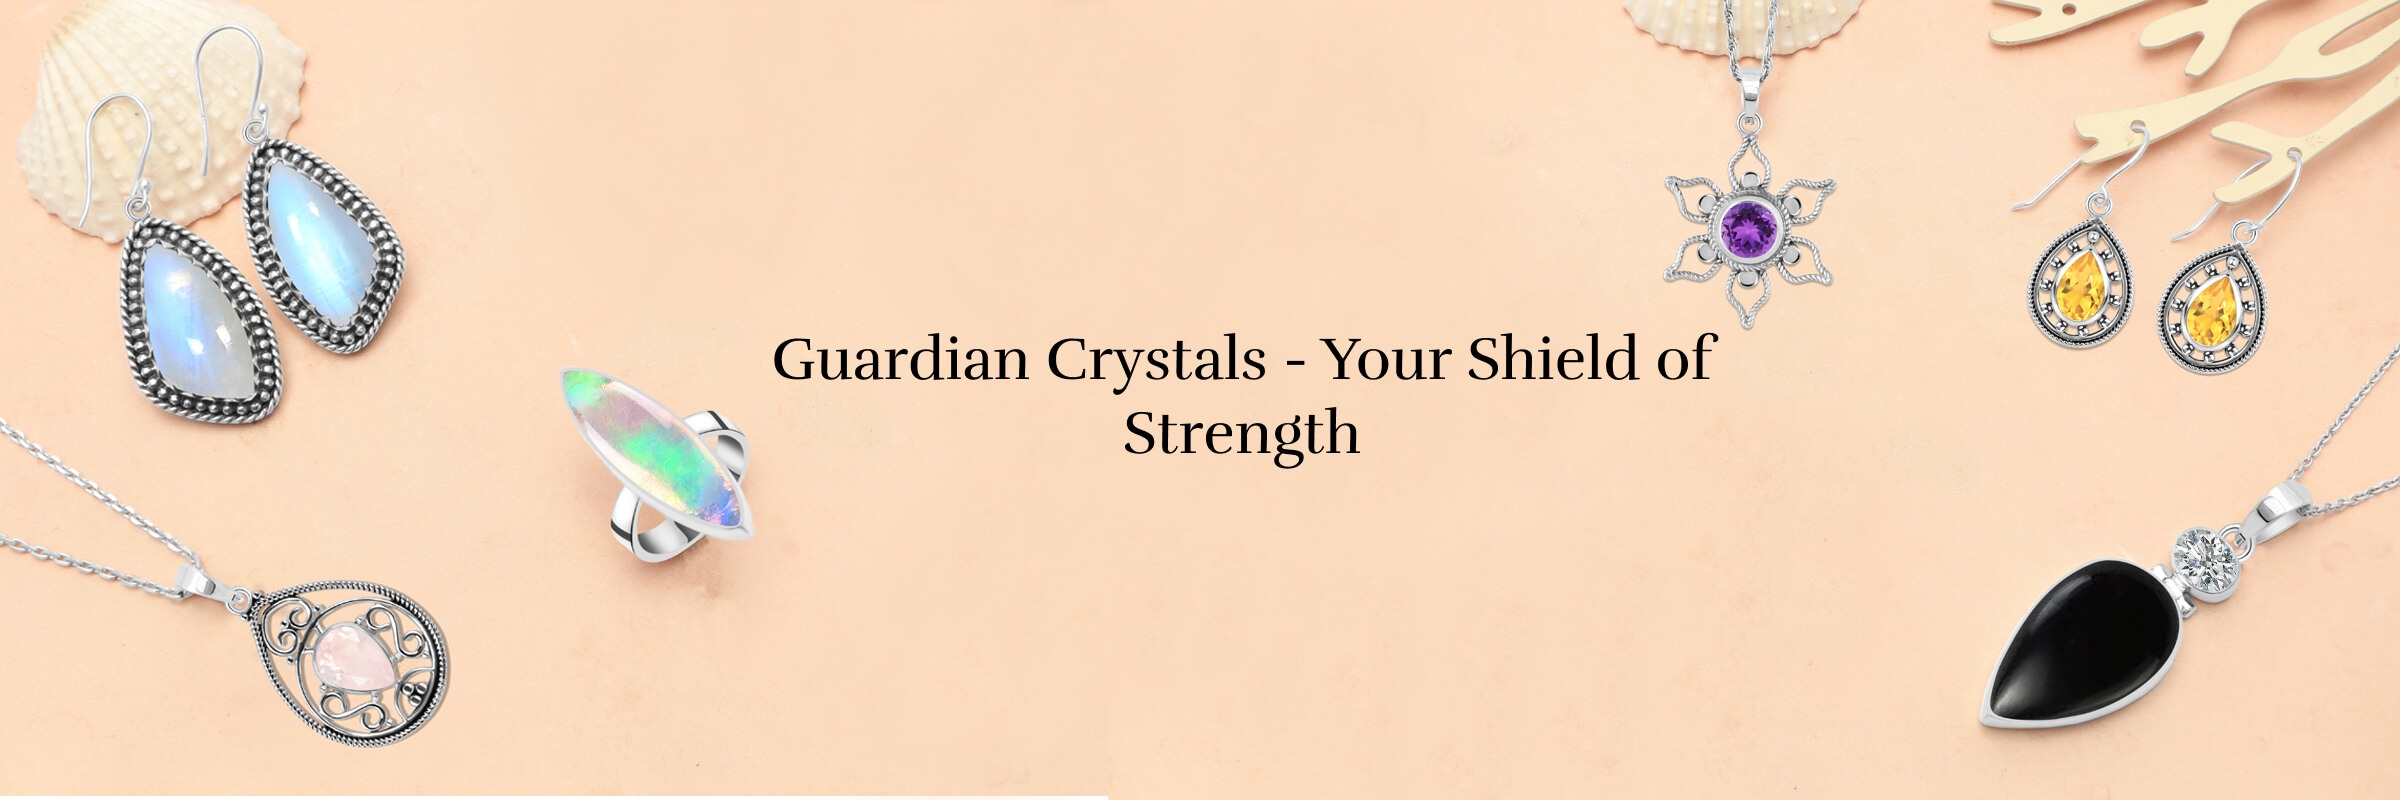 Best Protection Crystals and Stones - Which One Is Best For You